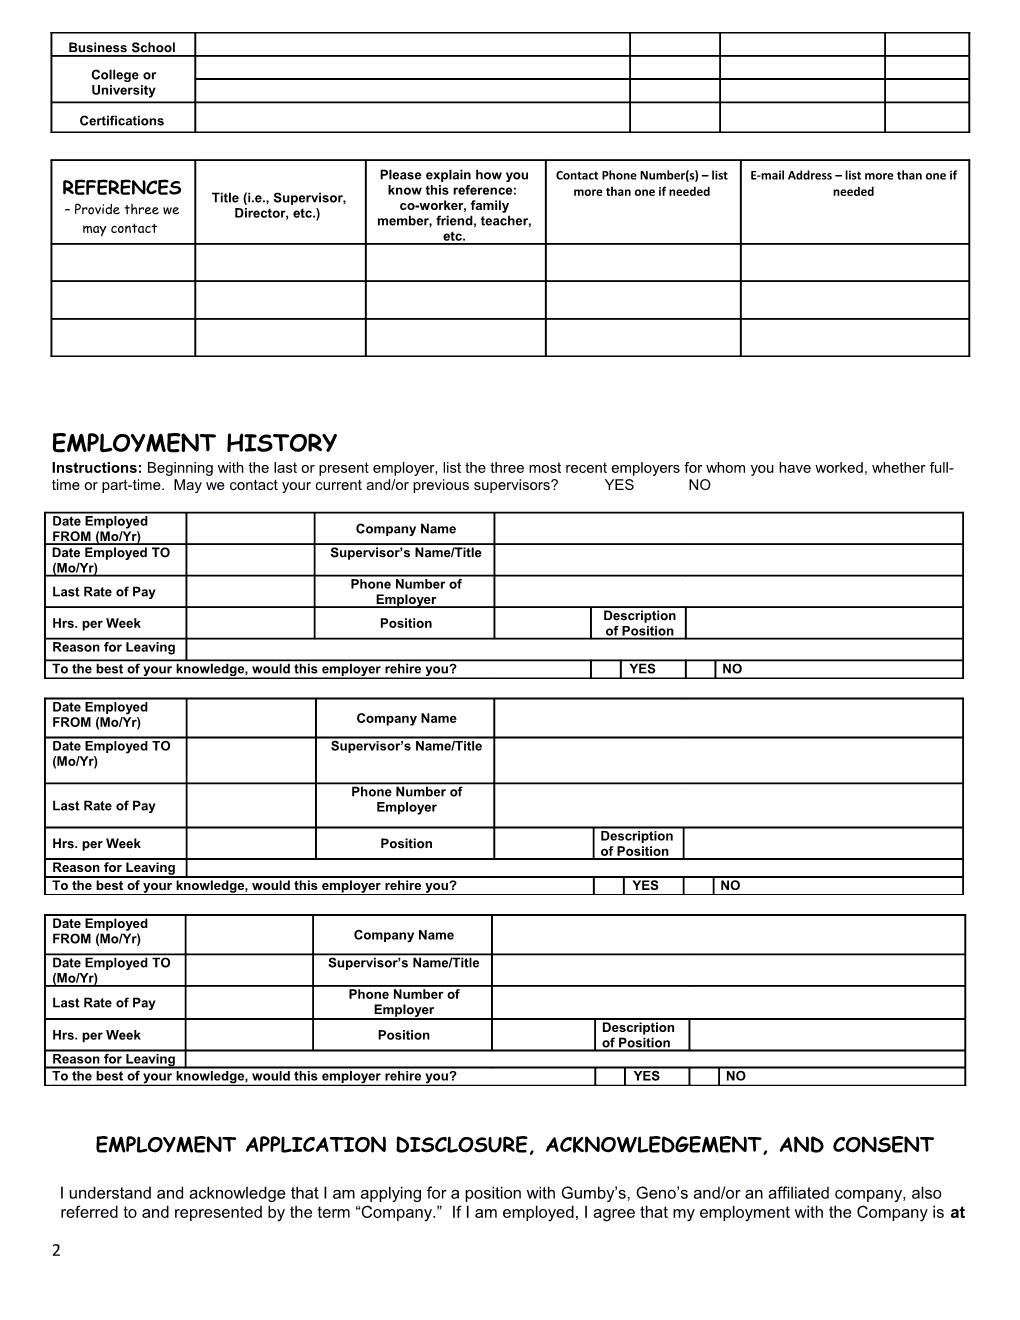 Application for Employment 10-24-07